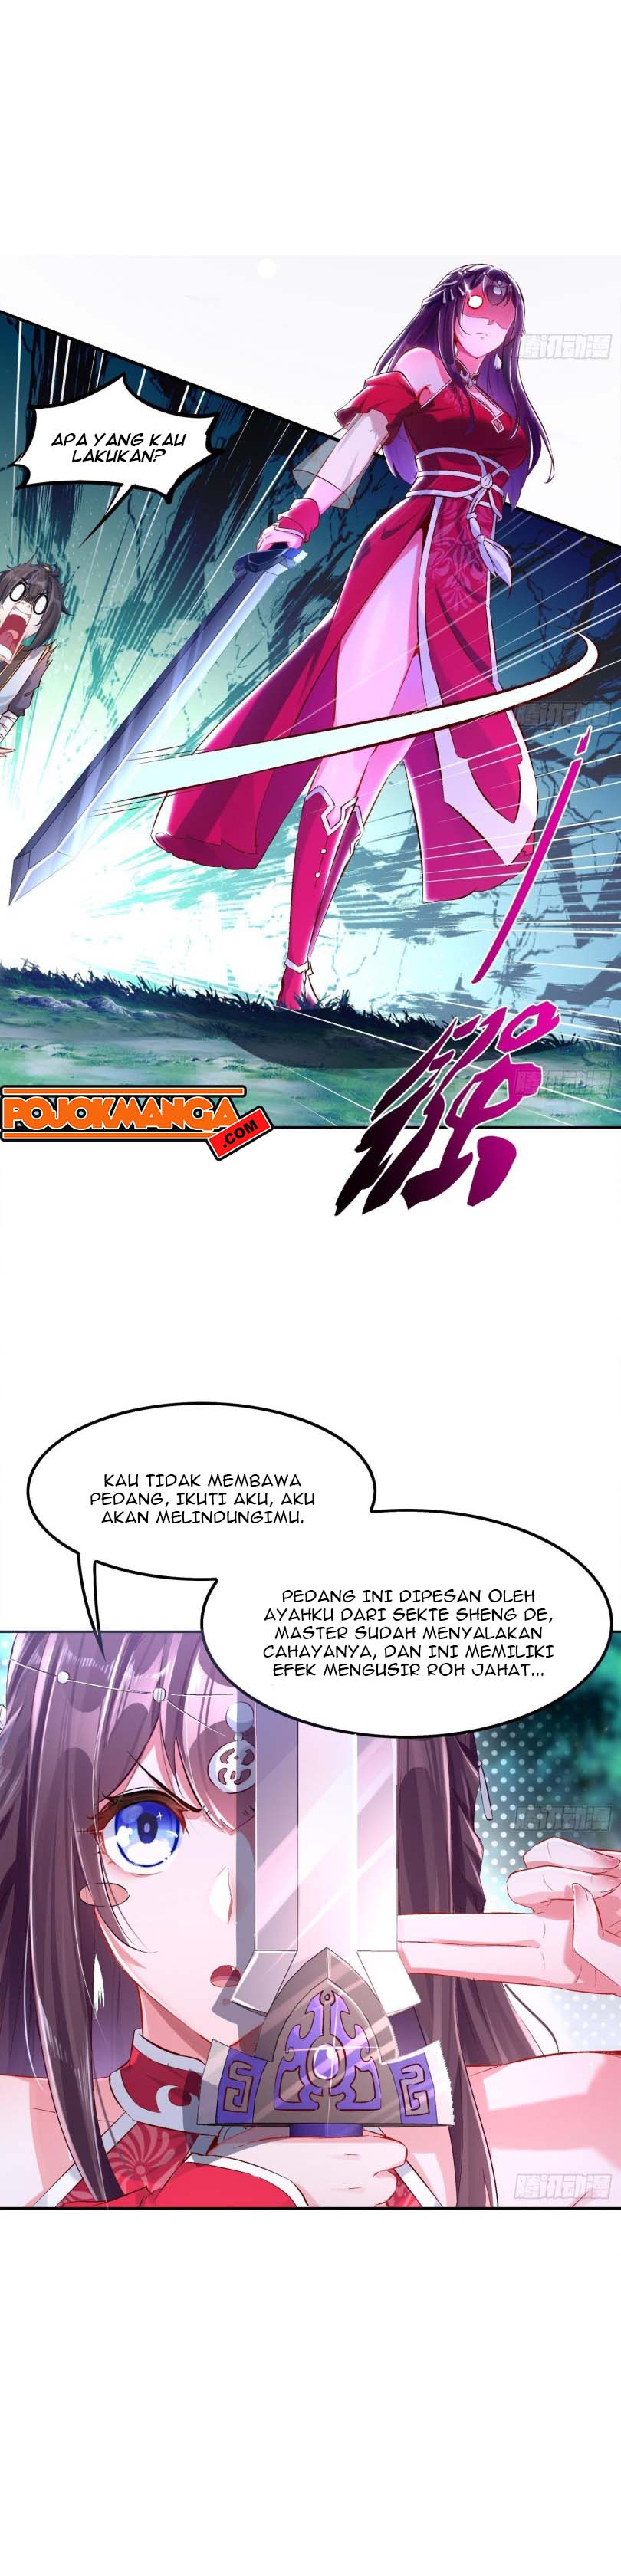 Rebirth of the Demon Reign (The Rebirth of the Demon God) Chapter 17